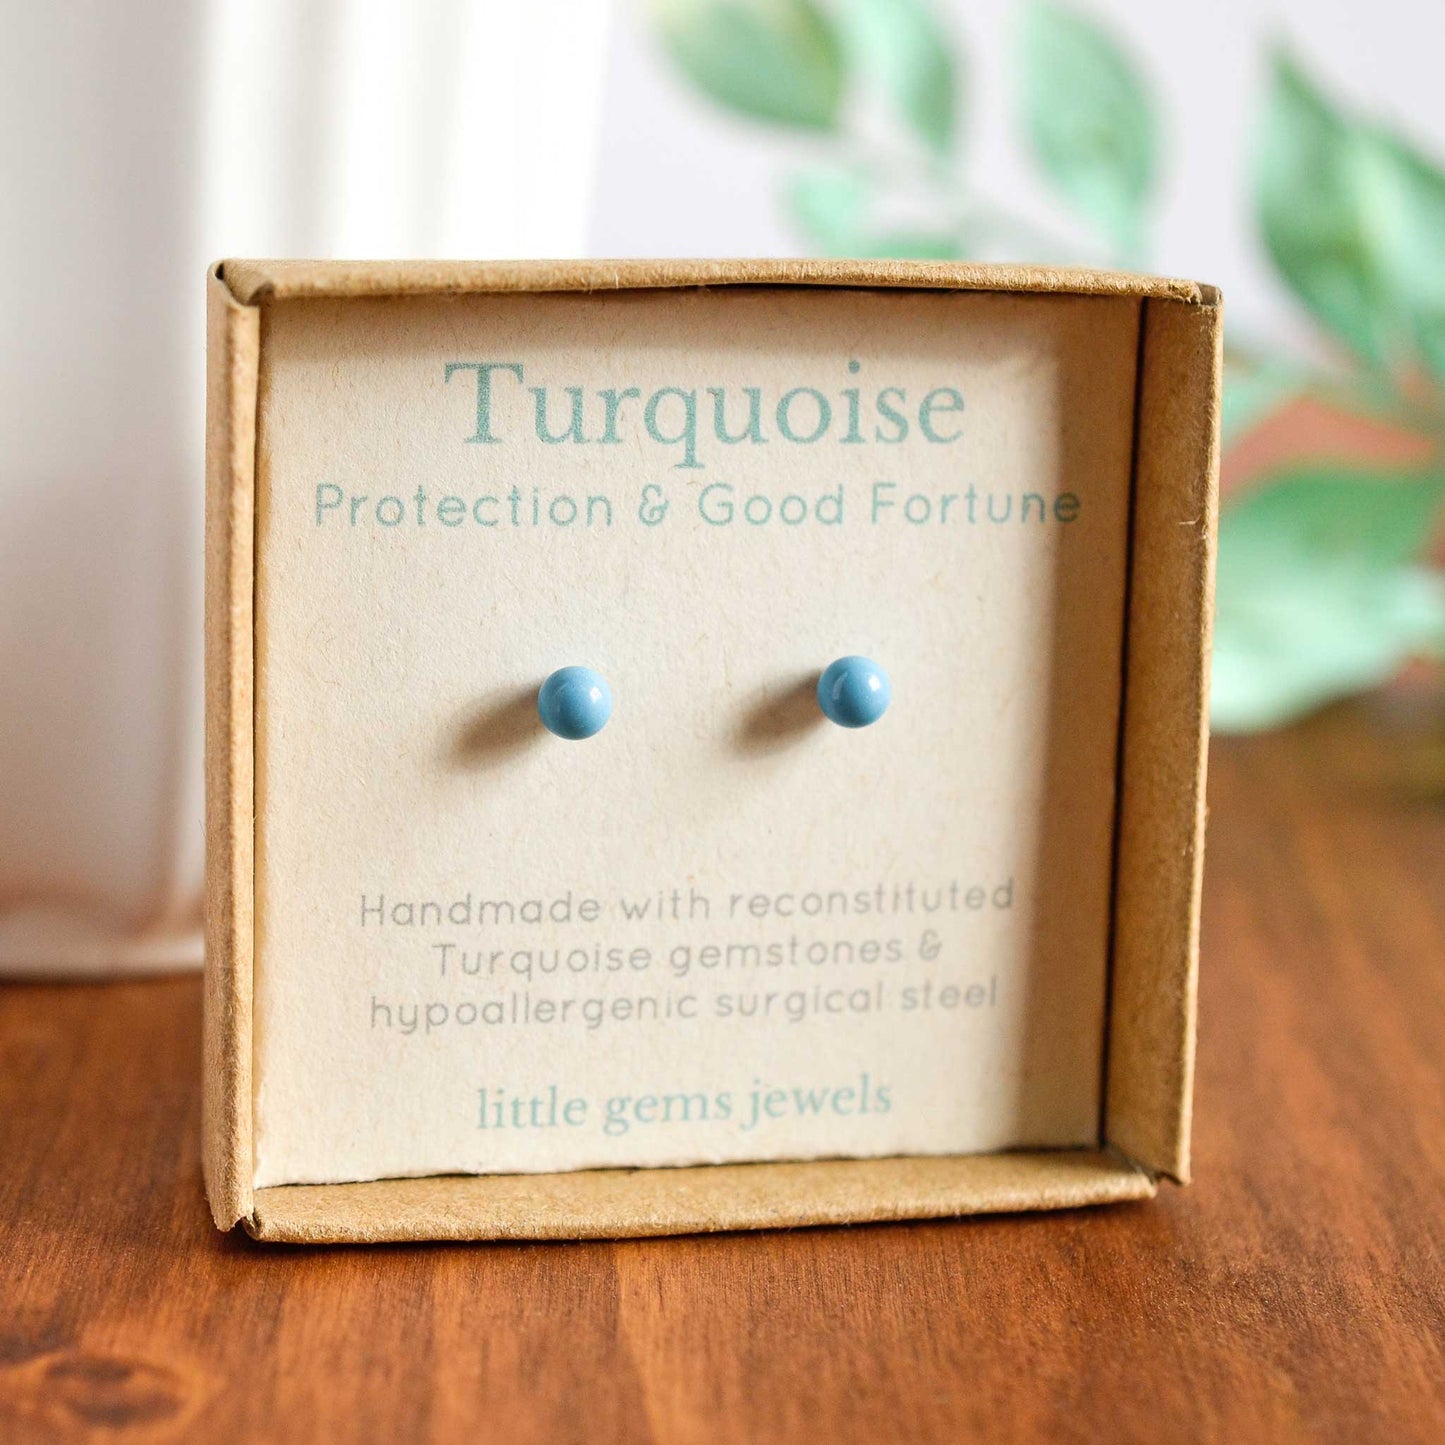 Tiny Turquoise stud earrings in eco friendly gift box